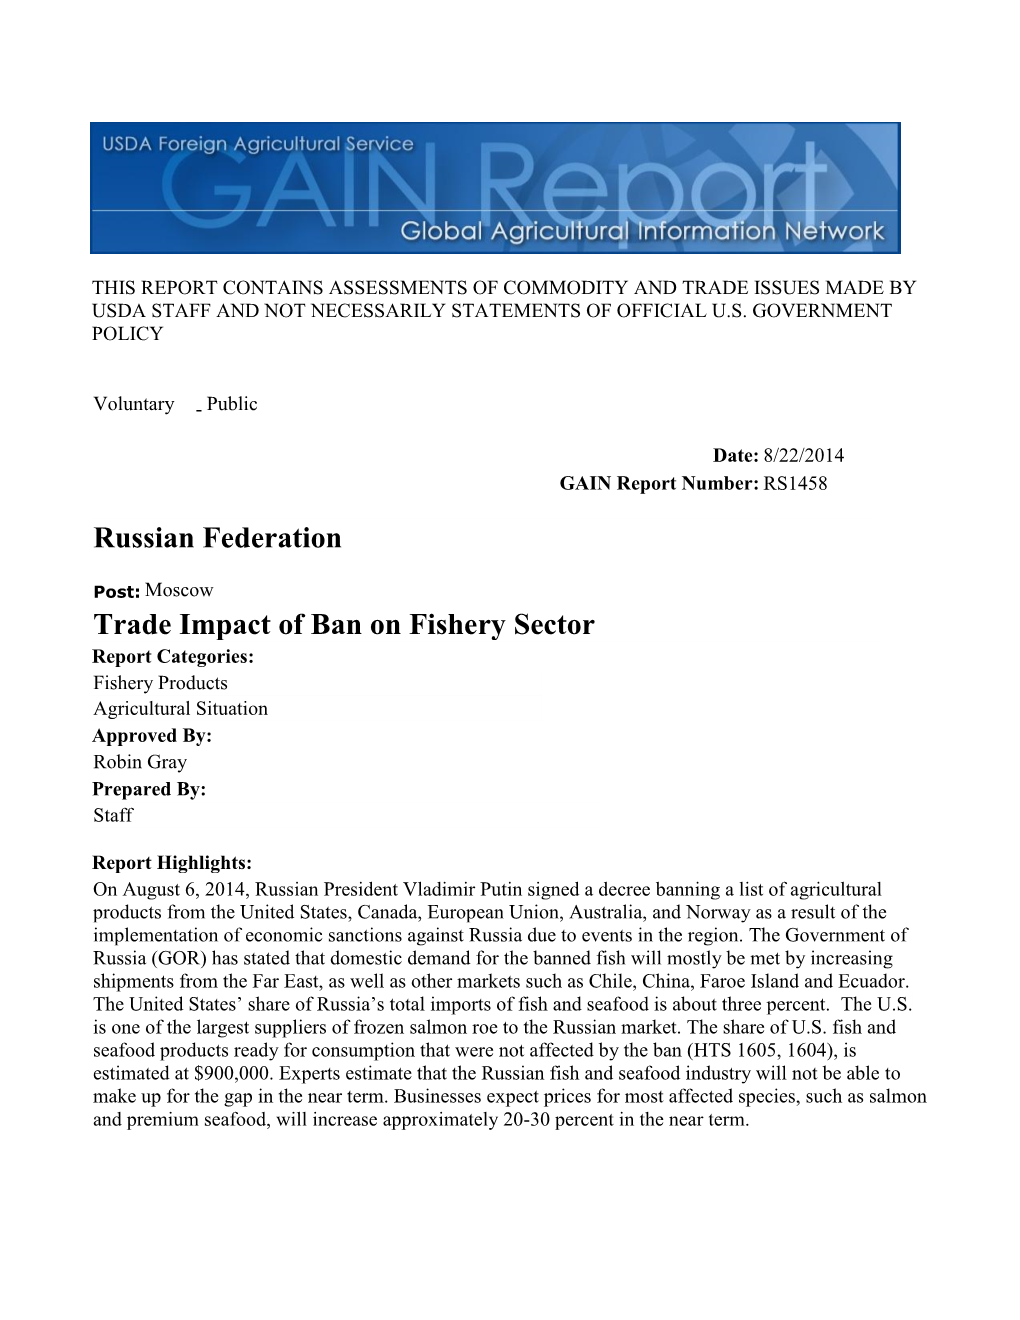 Trade Impact of Ban on Fishery Sector Russian Federation